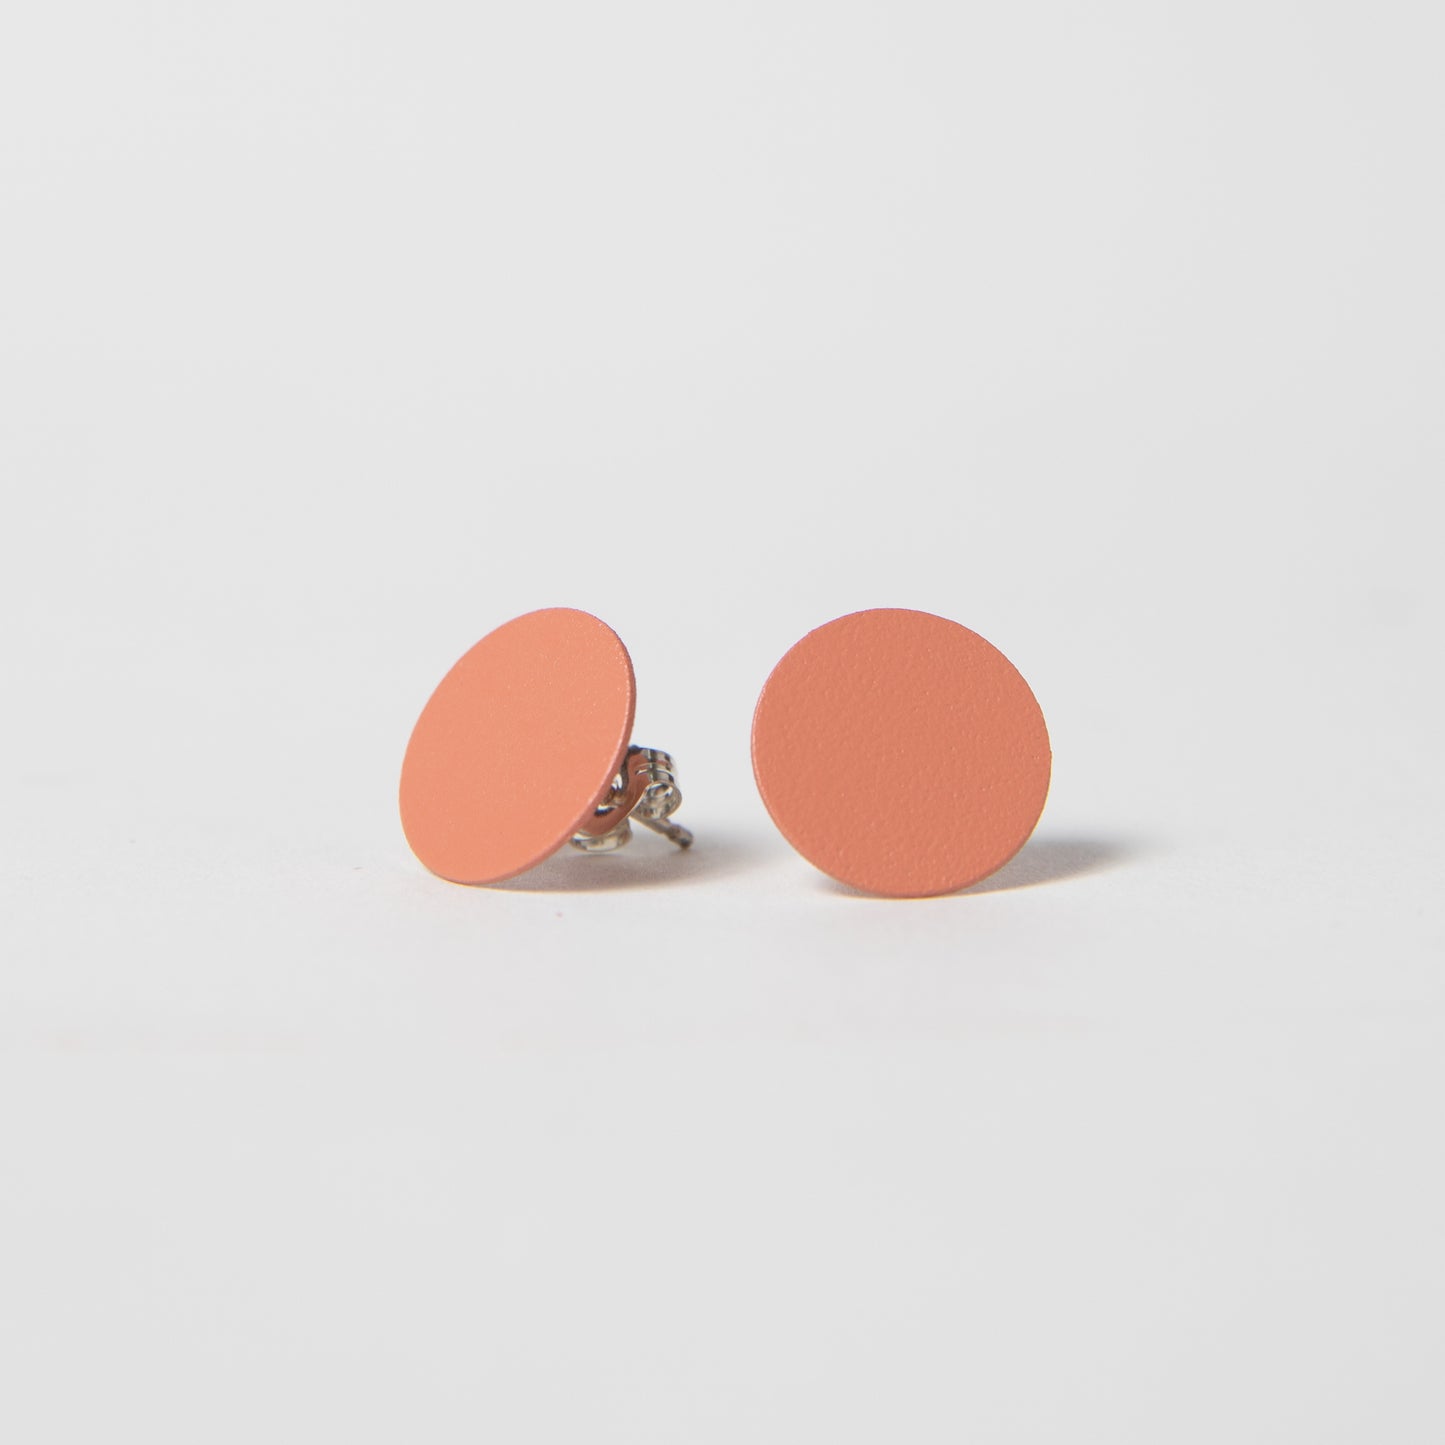 Round Brass earrings w/ Sterling Posts in coral.